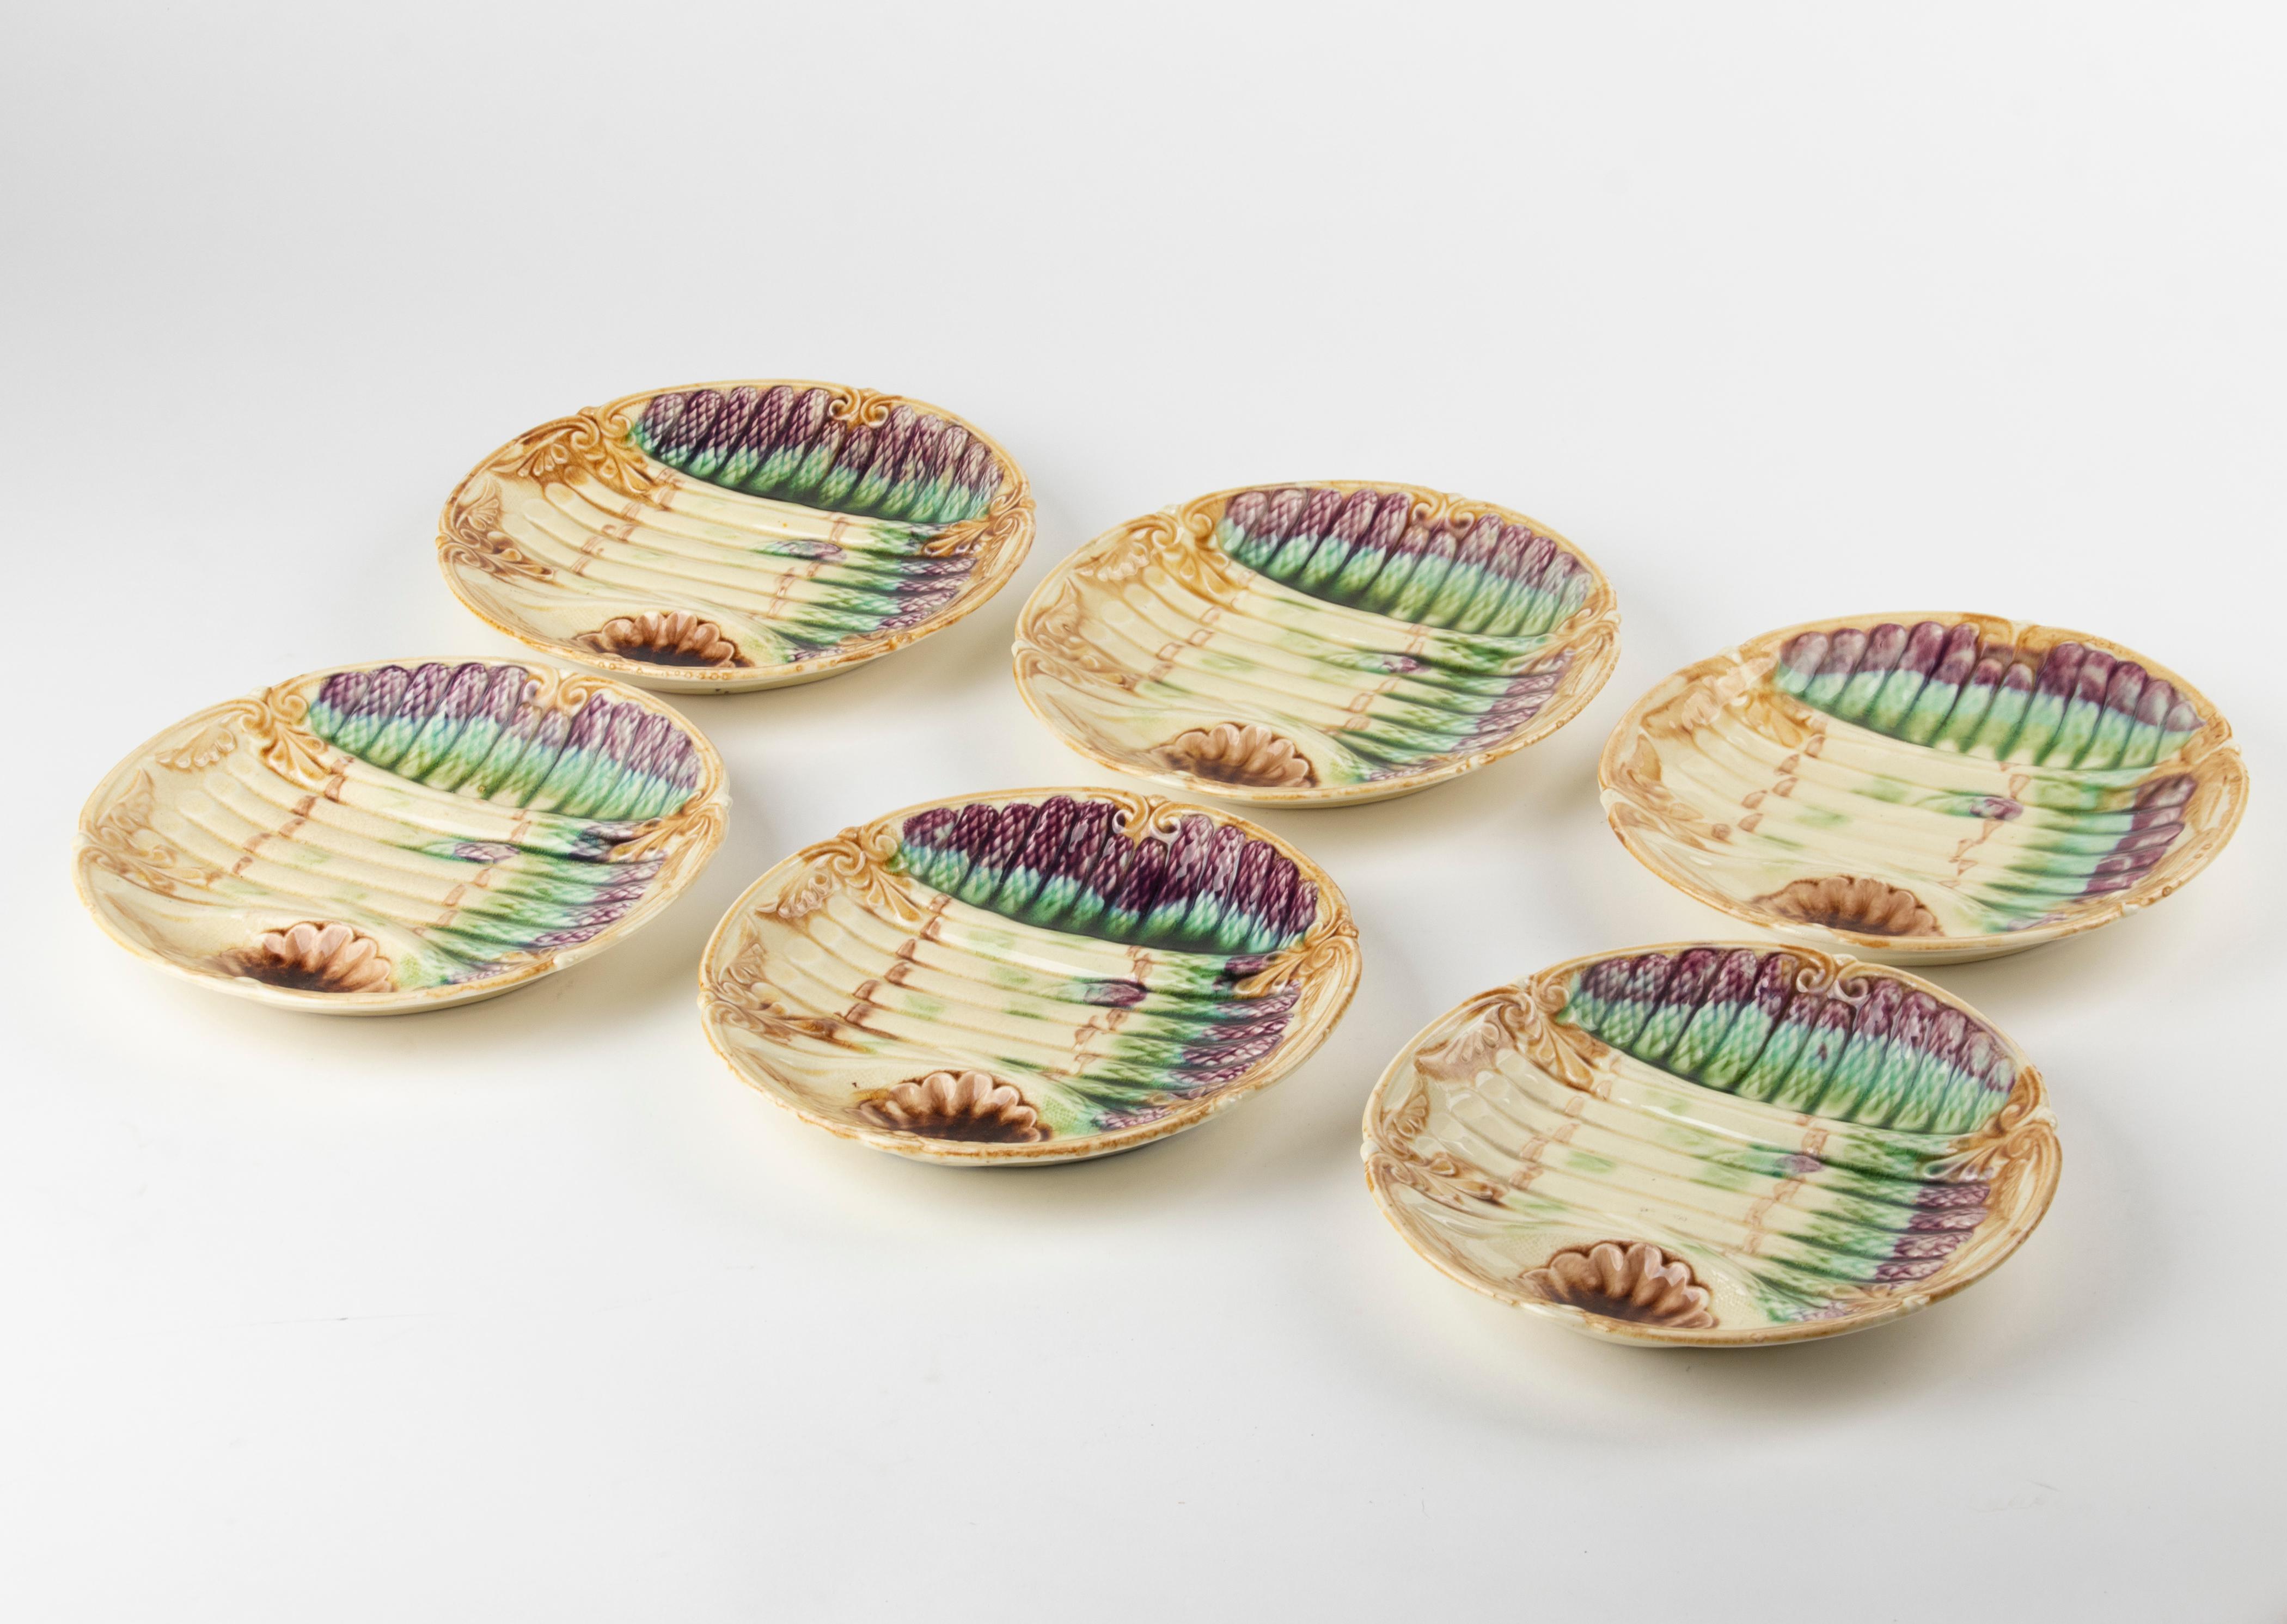 Set of 6 majolica asparagus plates.
Marked on the bottom, Faïencerie Onnaing.
French origin, dated around 1880-1890.
In good condition.